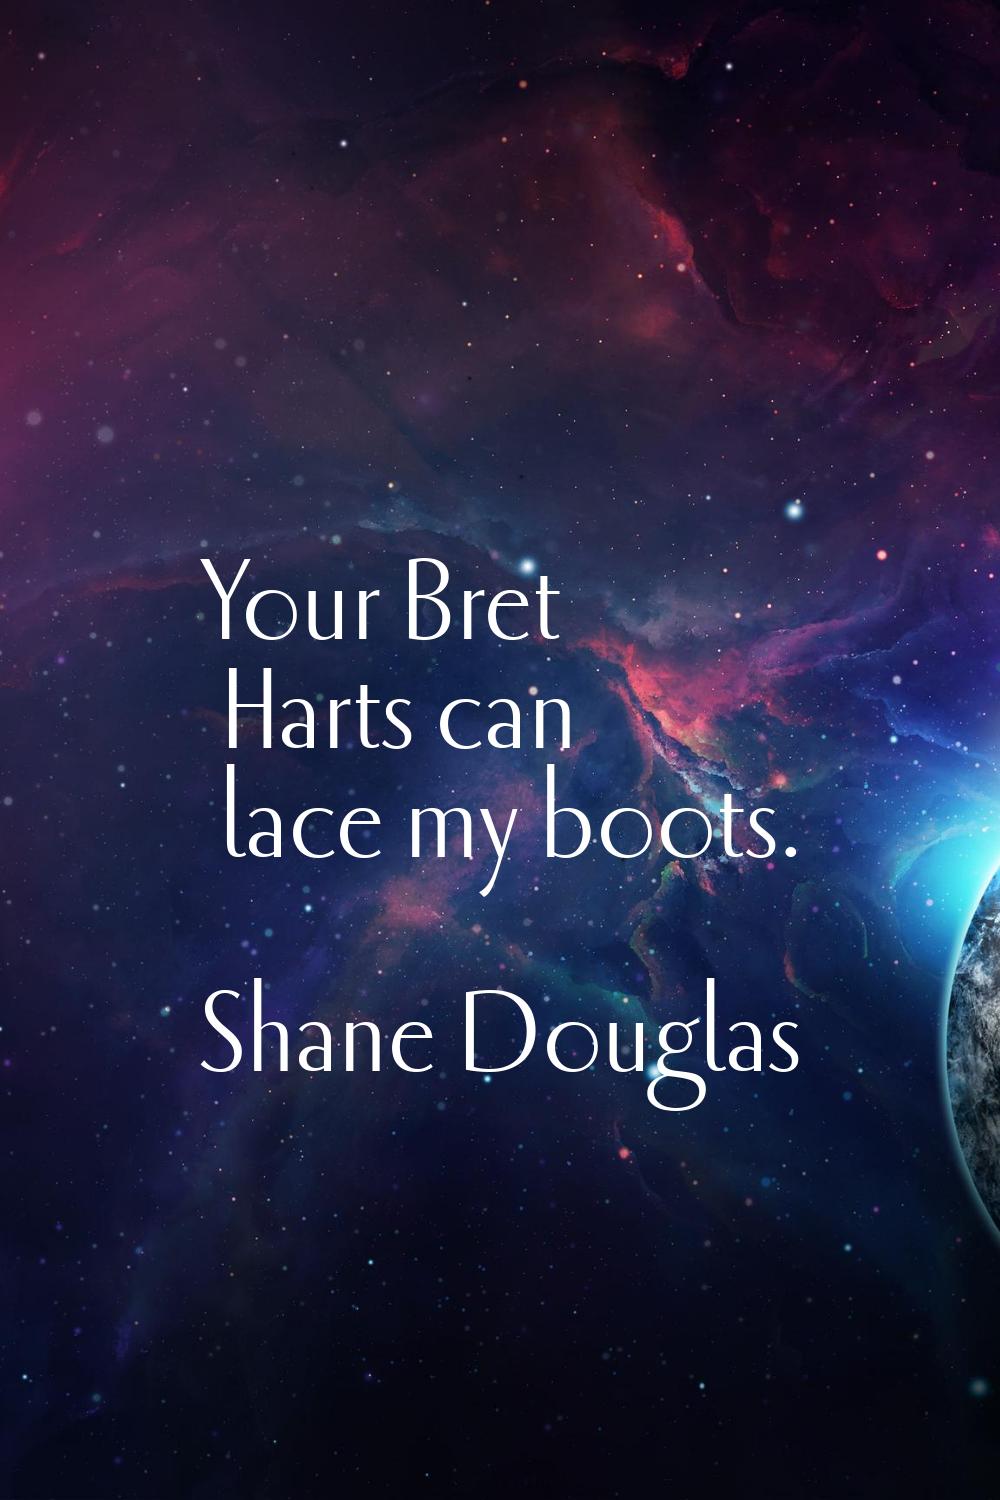 Your Bret Harts can lace my boots.